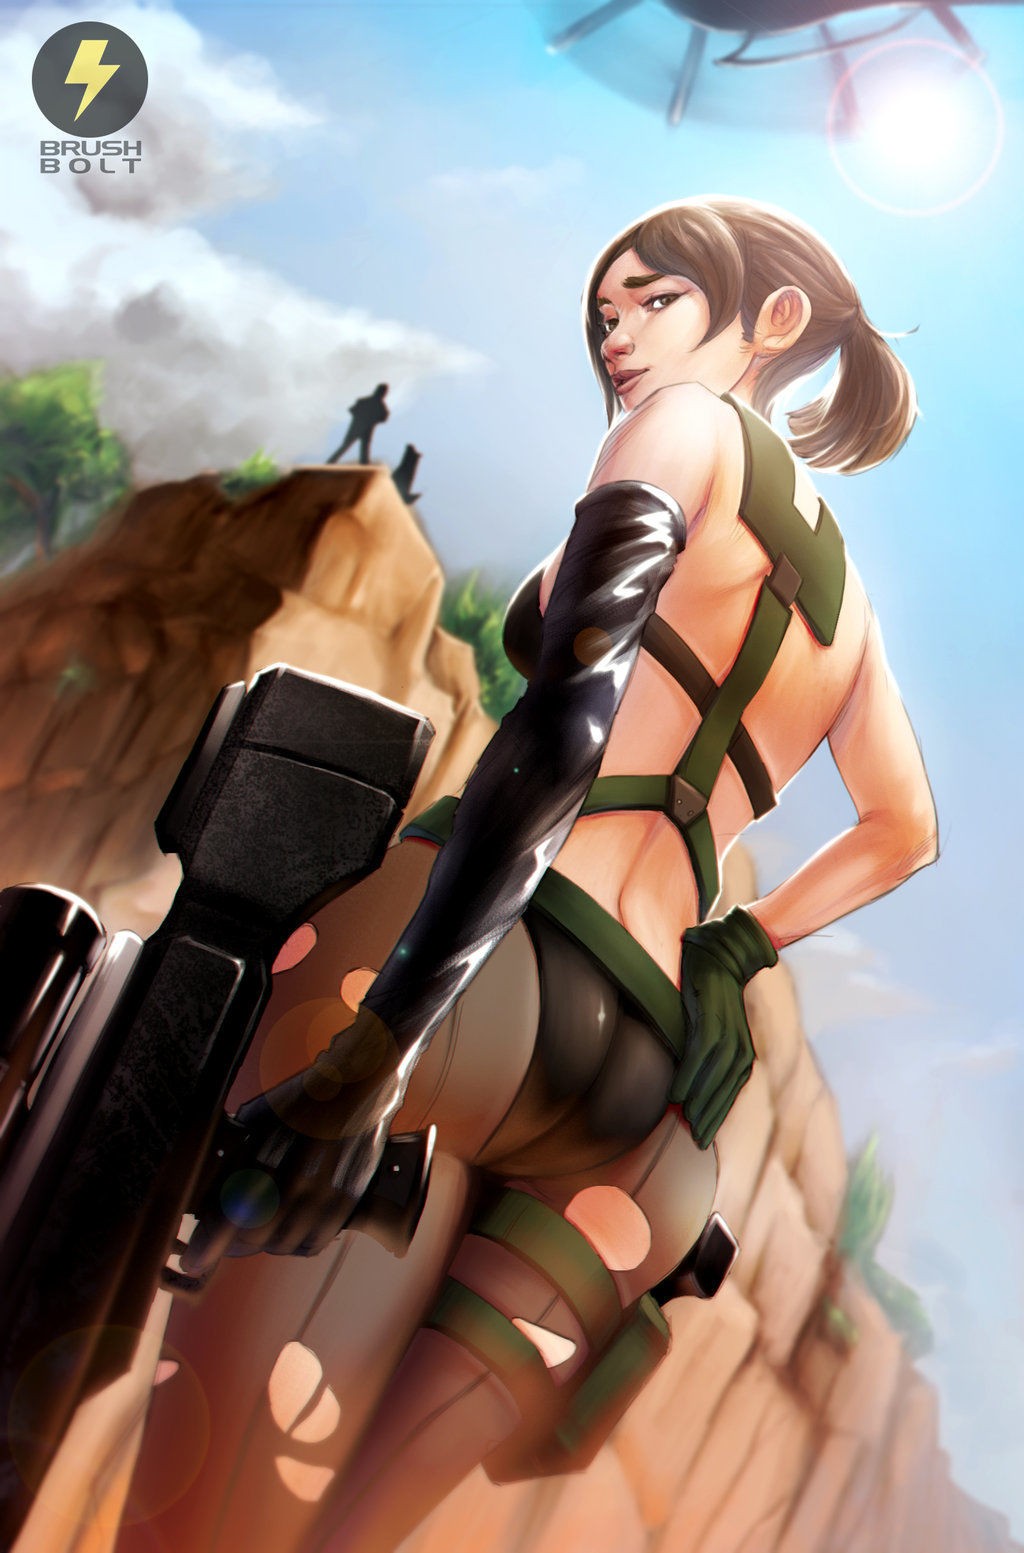 Anime 1024x1553 Quiet (metal gear) Metal Gear Solid Metal Gear Solid V: The Phantom Pain ass fan art video game girls video game characters